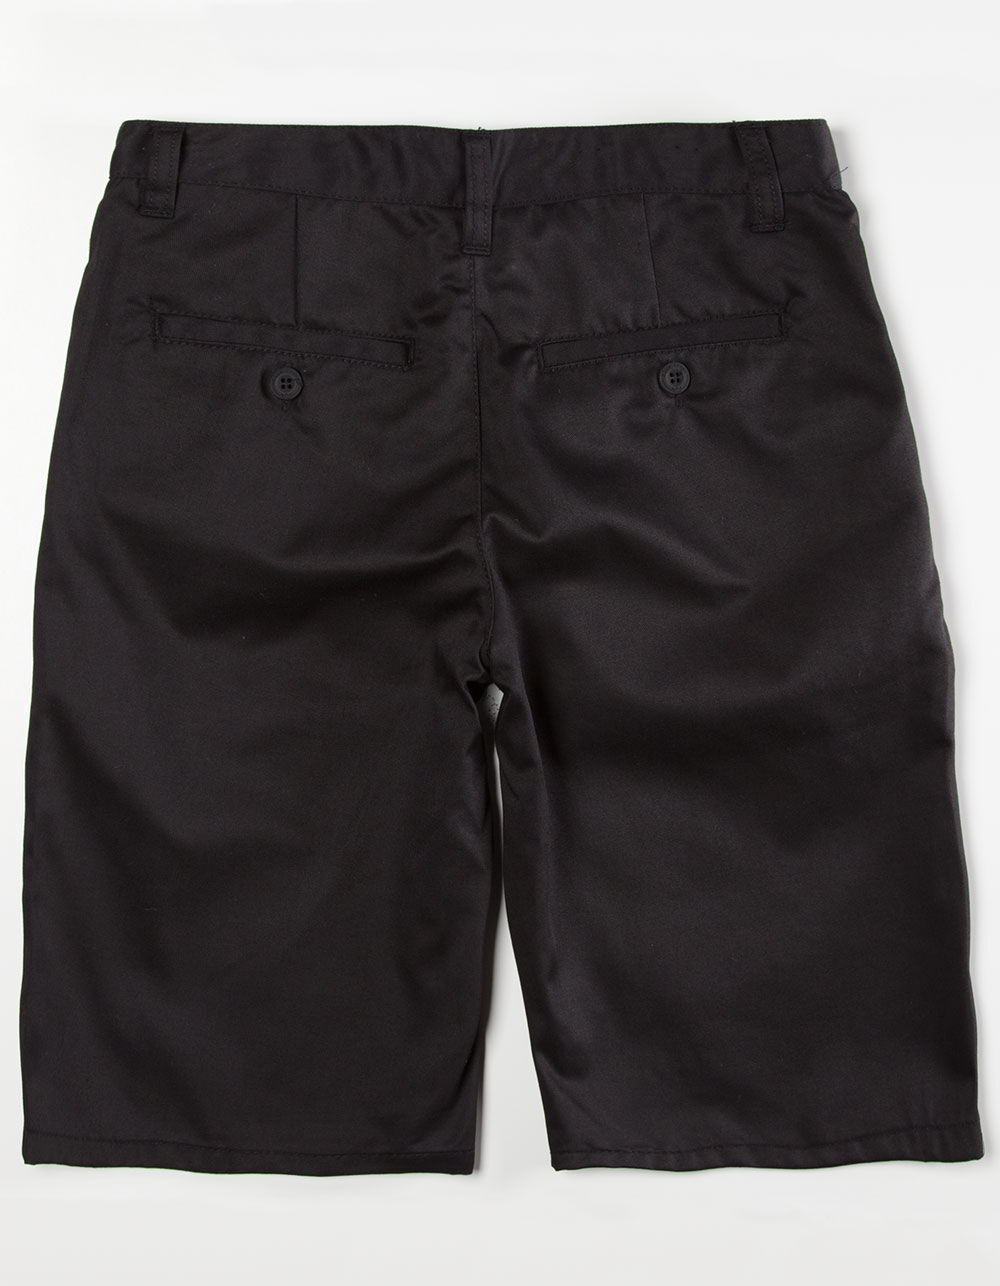 BLUE CROWN Chino Boys Shorts image number 1